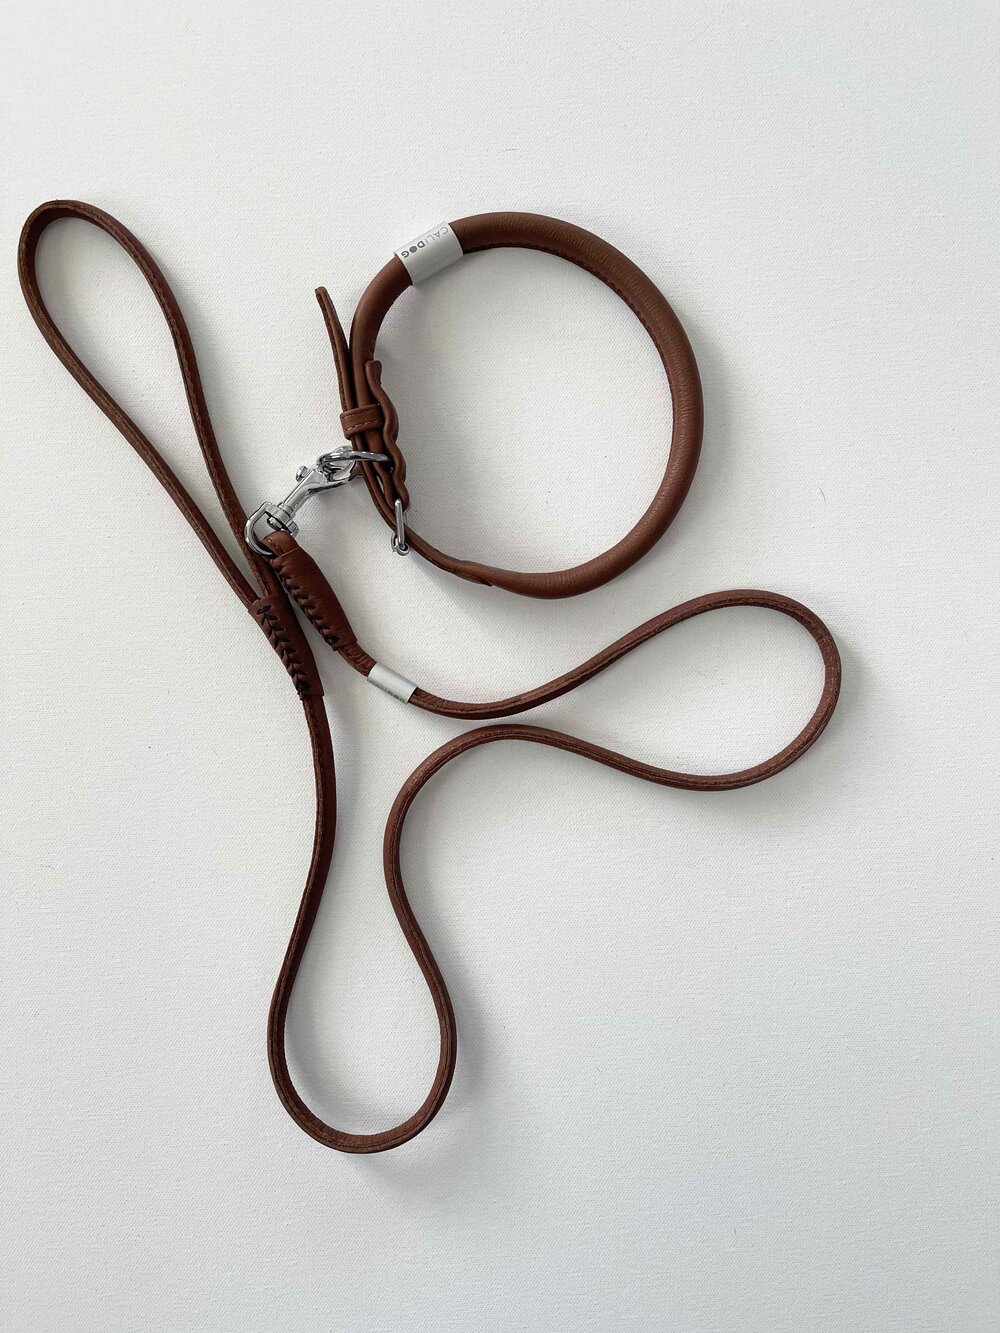 Brown Block Dog Set Collar Leash Necklace Pendant Free High Quality Gift  Box Soft Leather Dog Pet Collars Leads Accessories - AliExpress